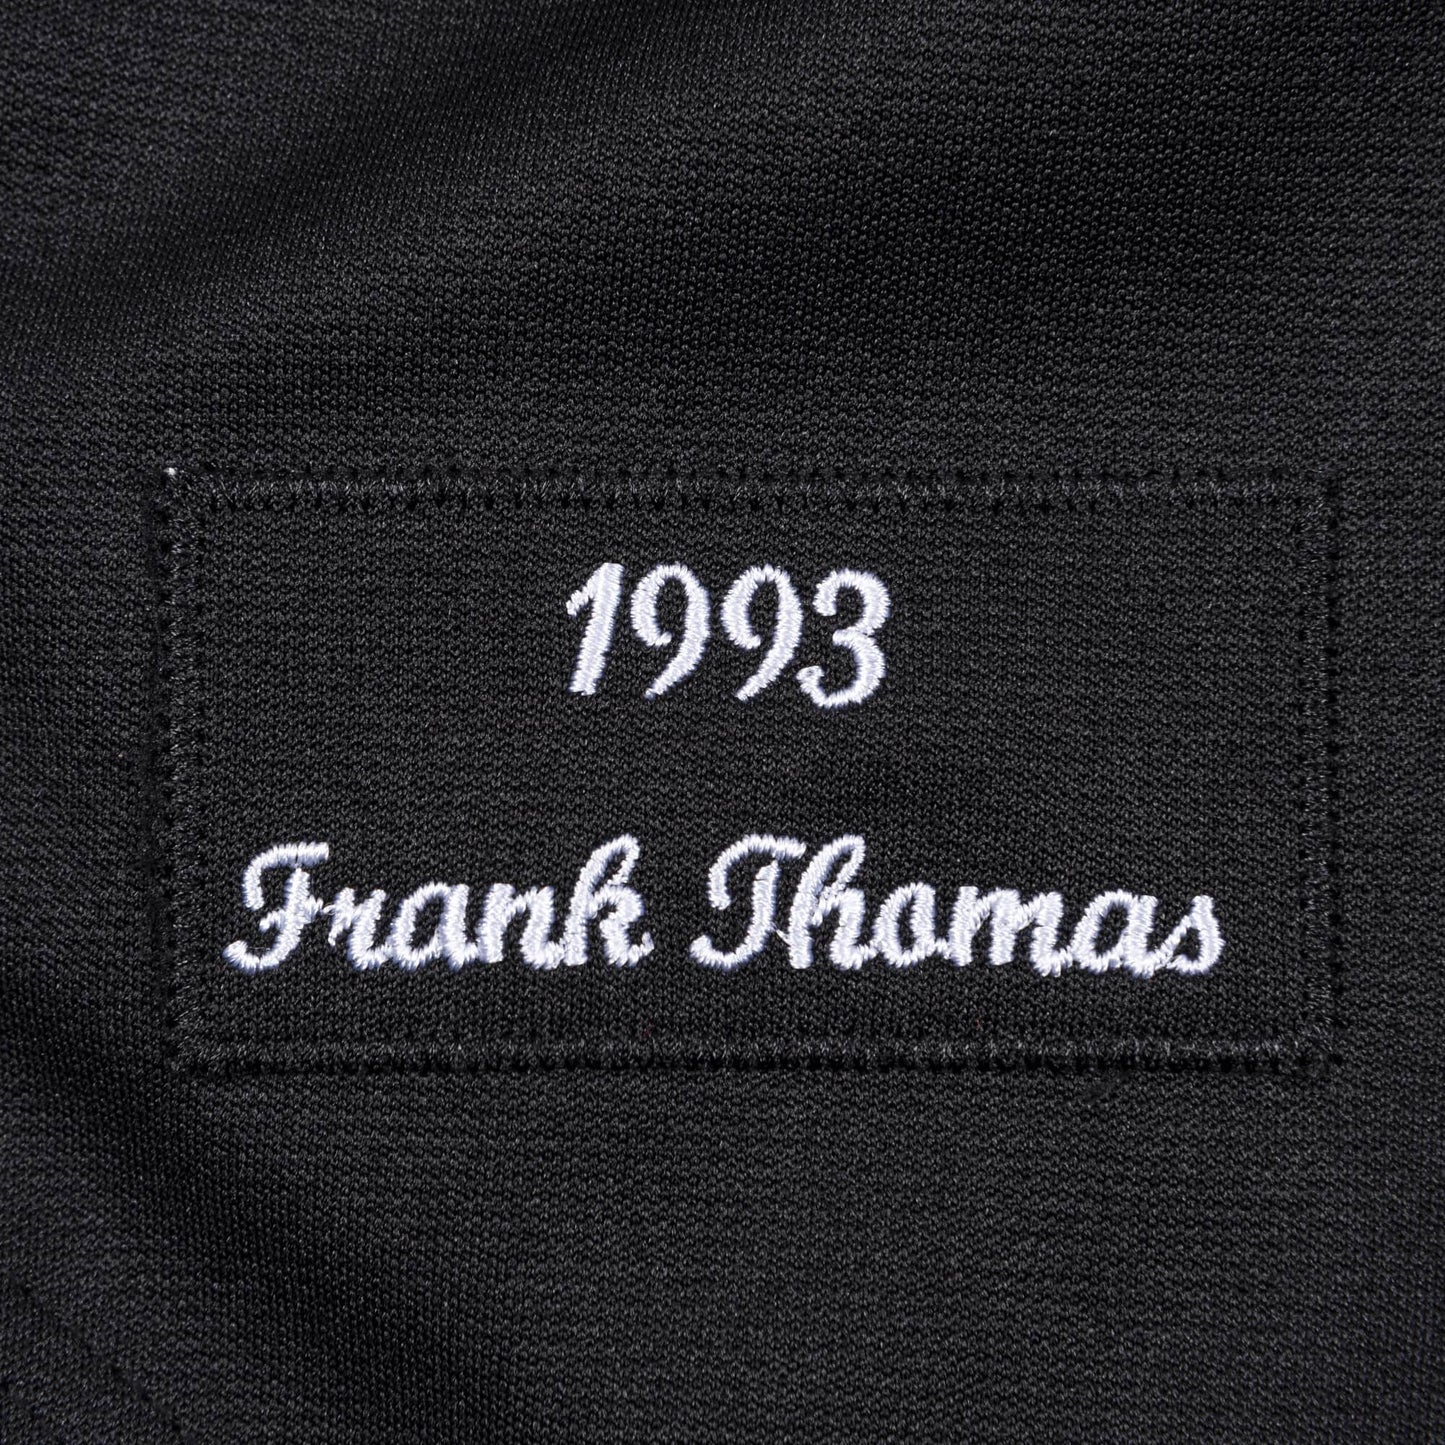 Authentic Jersey Chicago White Sox 1993 Frank Thomas – Ultimate Sports Swag